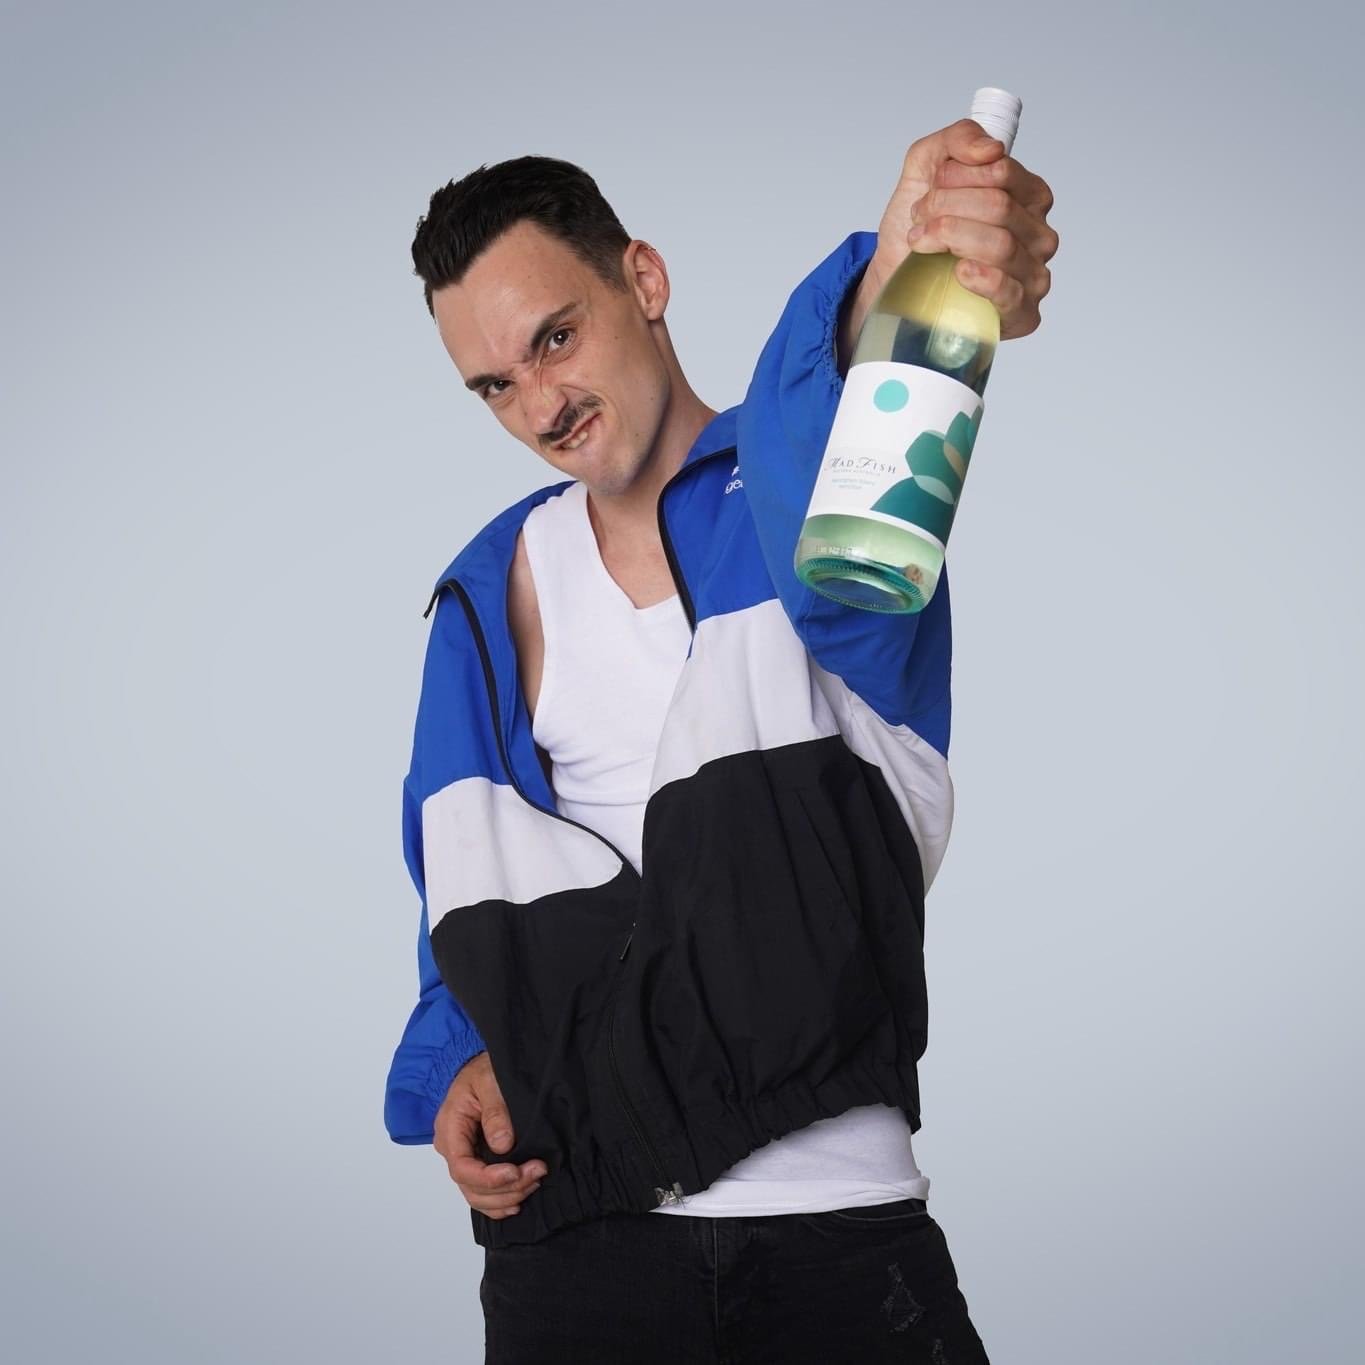 Promotional shot for Mad Fish Wines